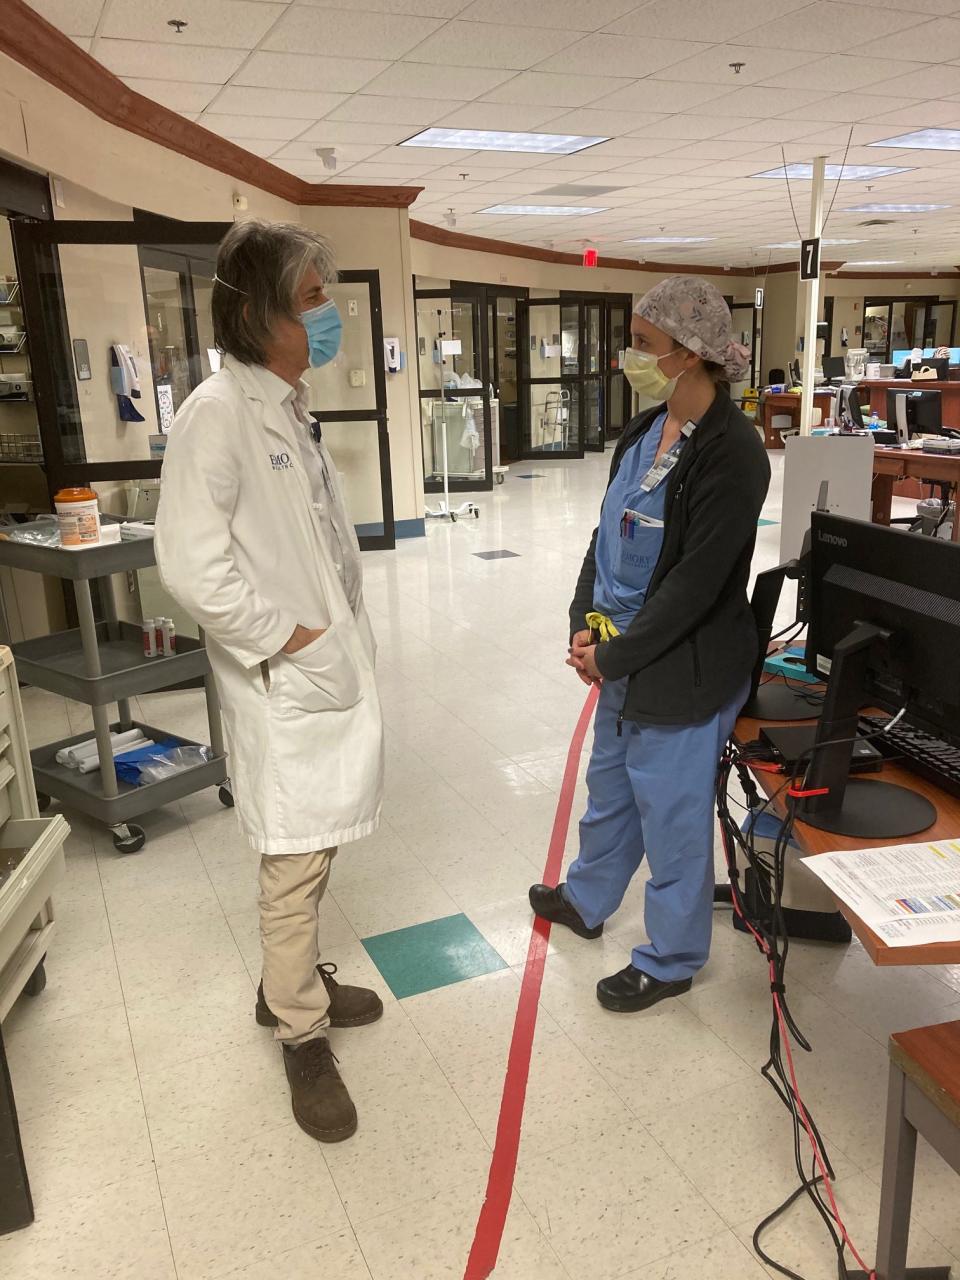 Joel Zivot, an Emory University professor and ICU doctor, speaks with Hailey Wetta, a critical care physician. Both work with COVID-19 patients at Atlanta's Emory Decatur Hospital.